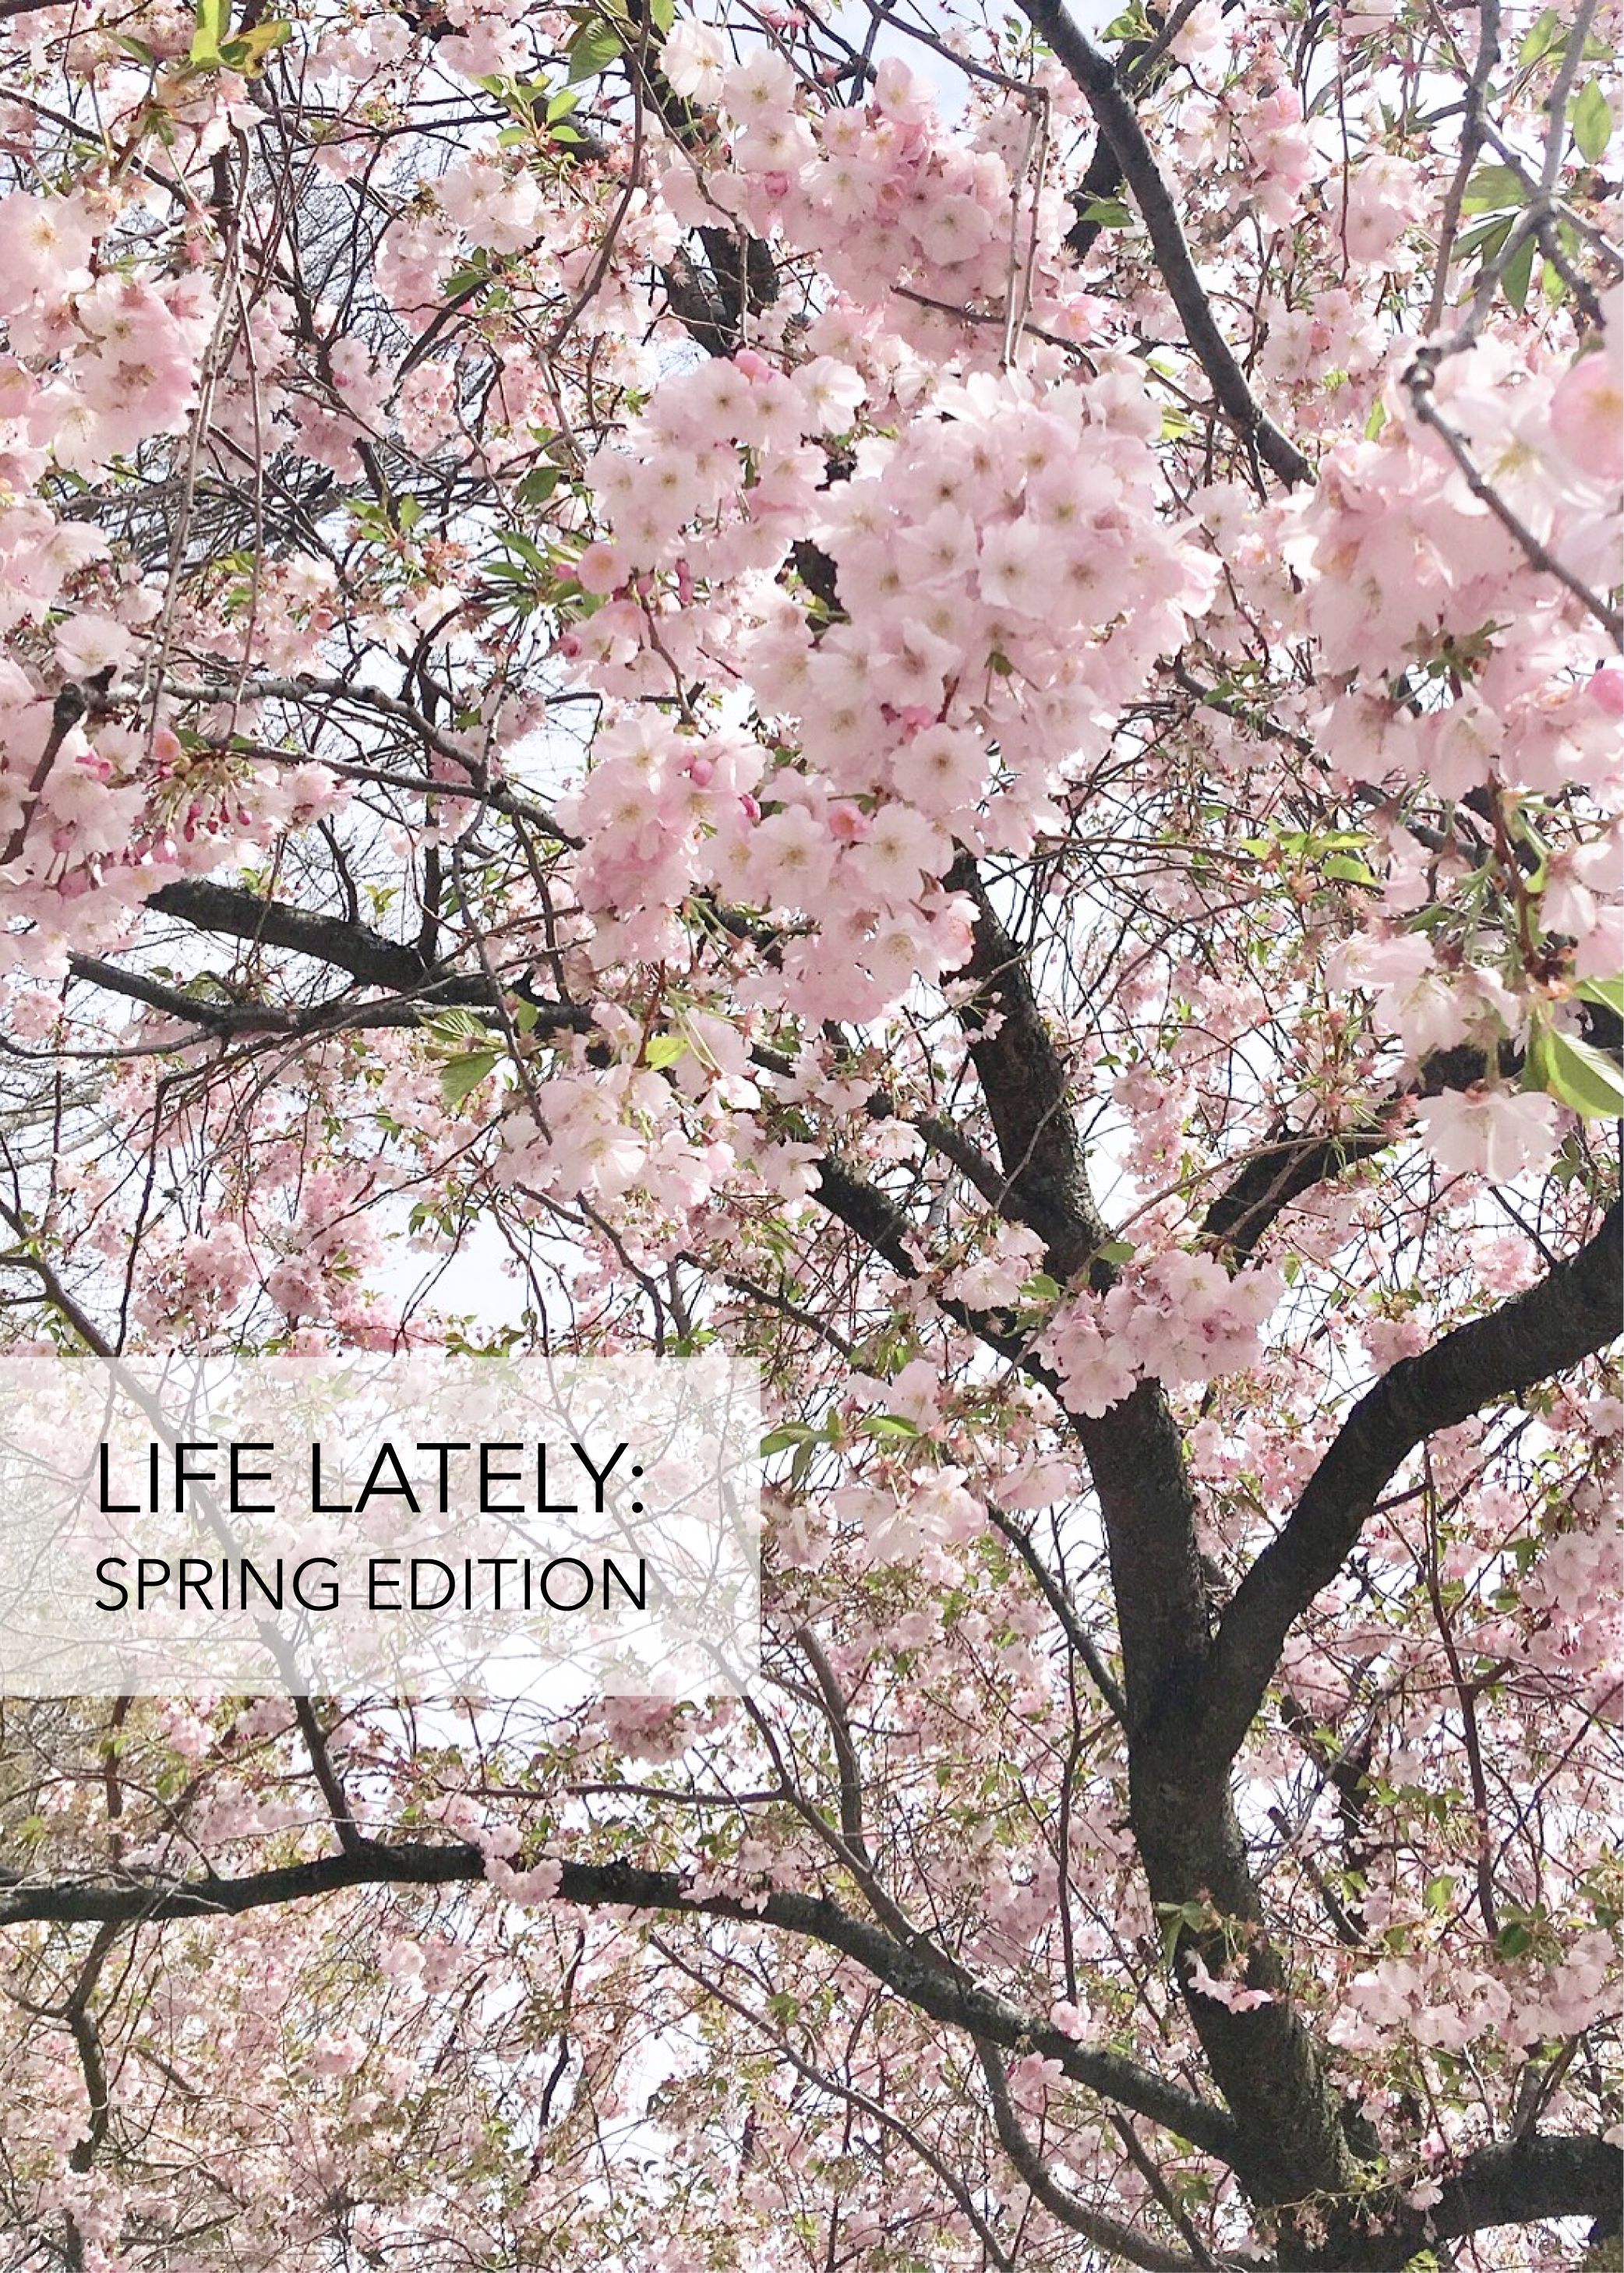 Life Lately: Spring Edition